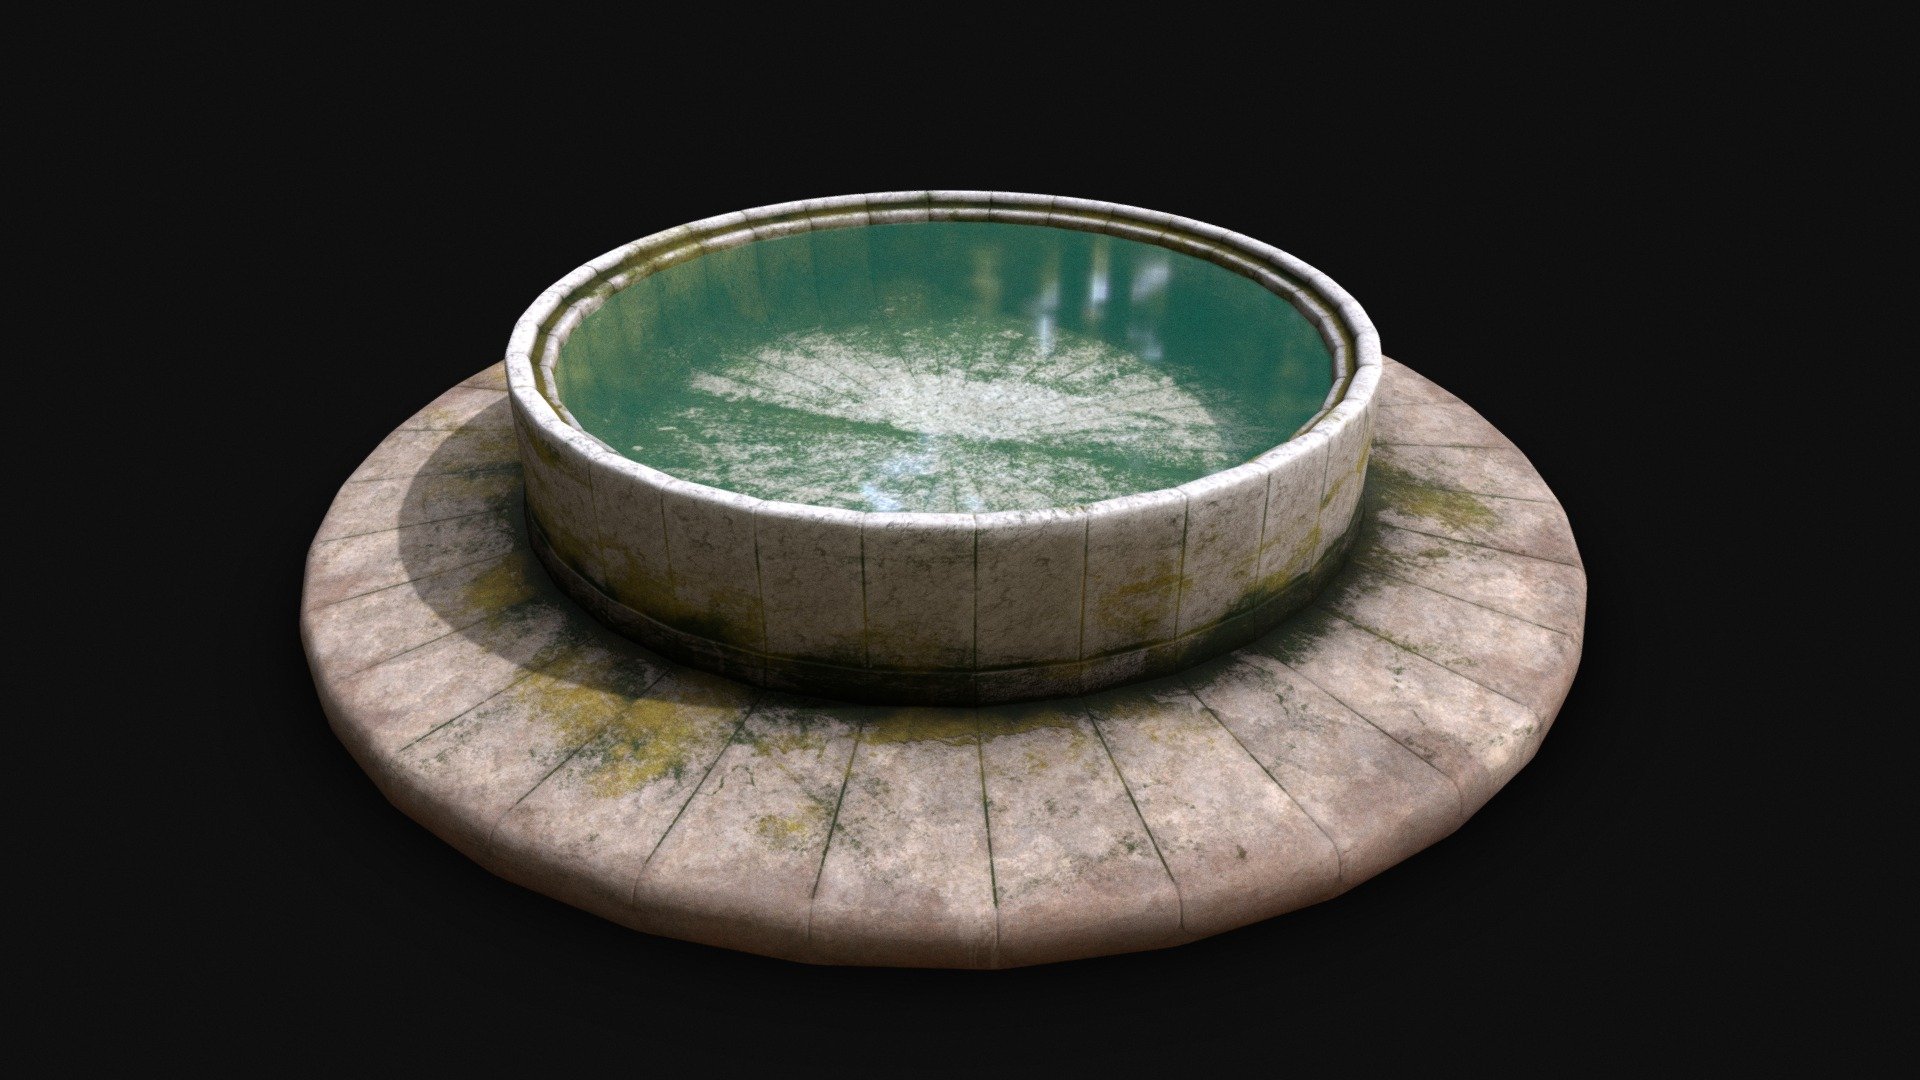 Victorian stone pond for growing lotuses. Designed to be placed in gardens and greenhouses 3d model